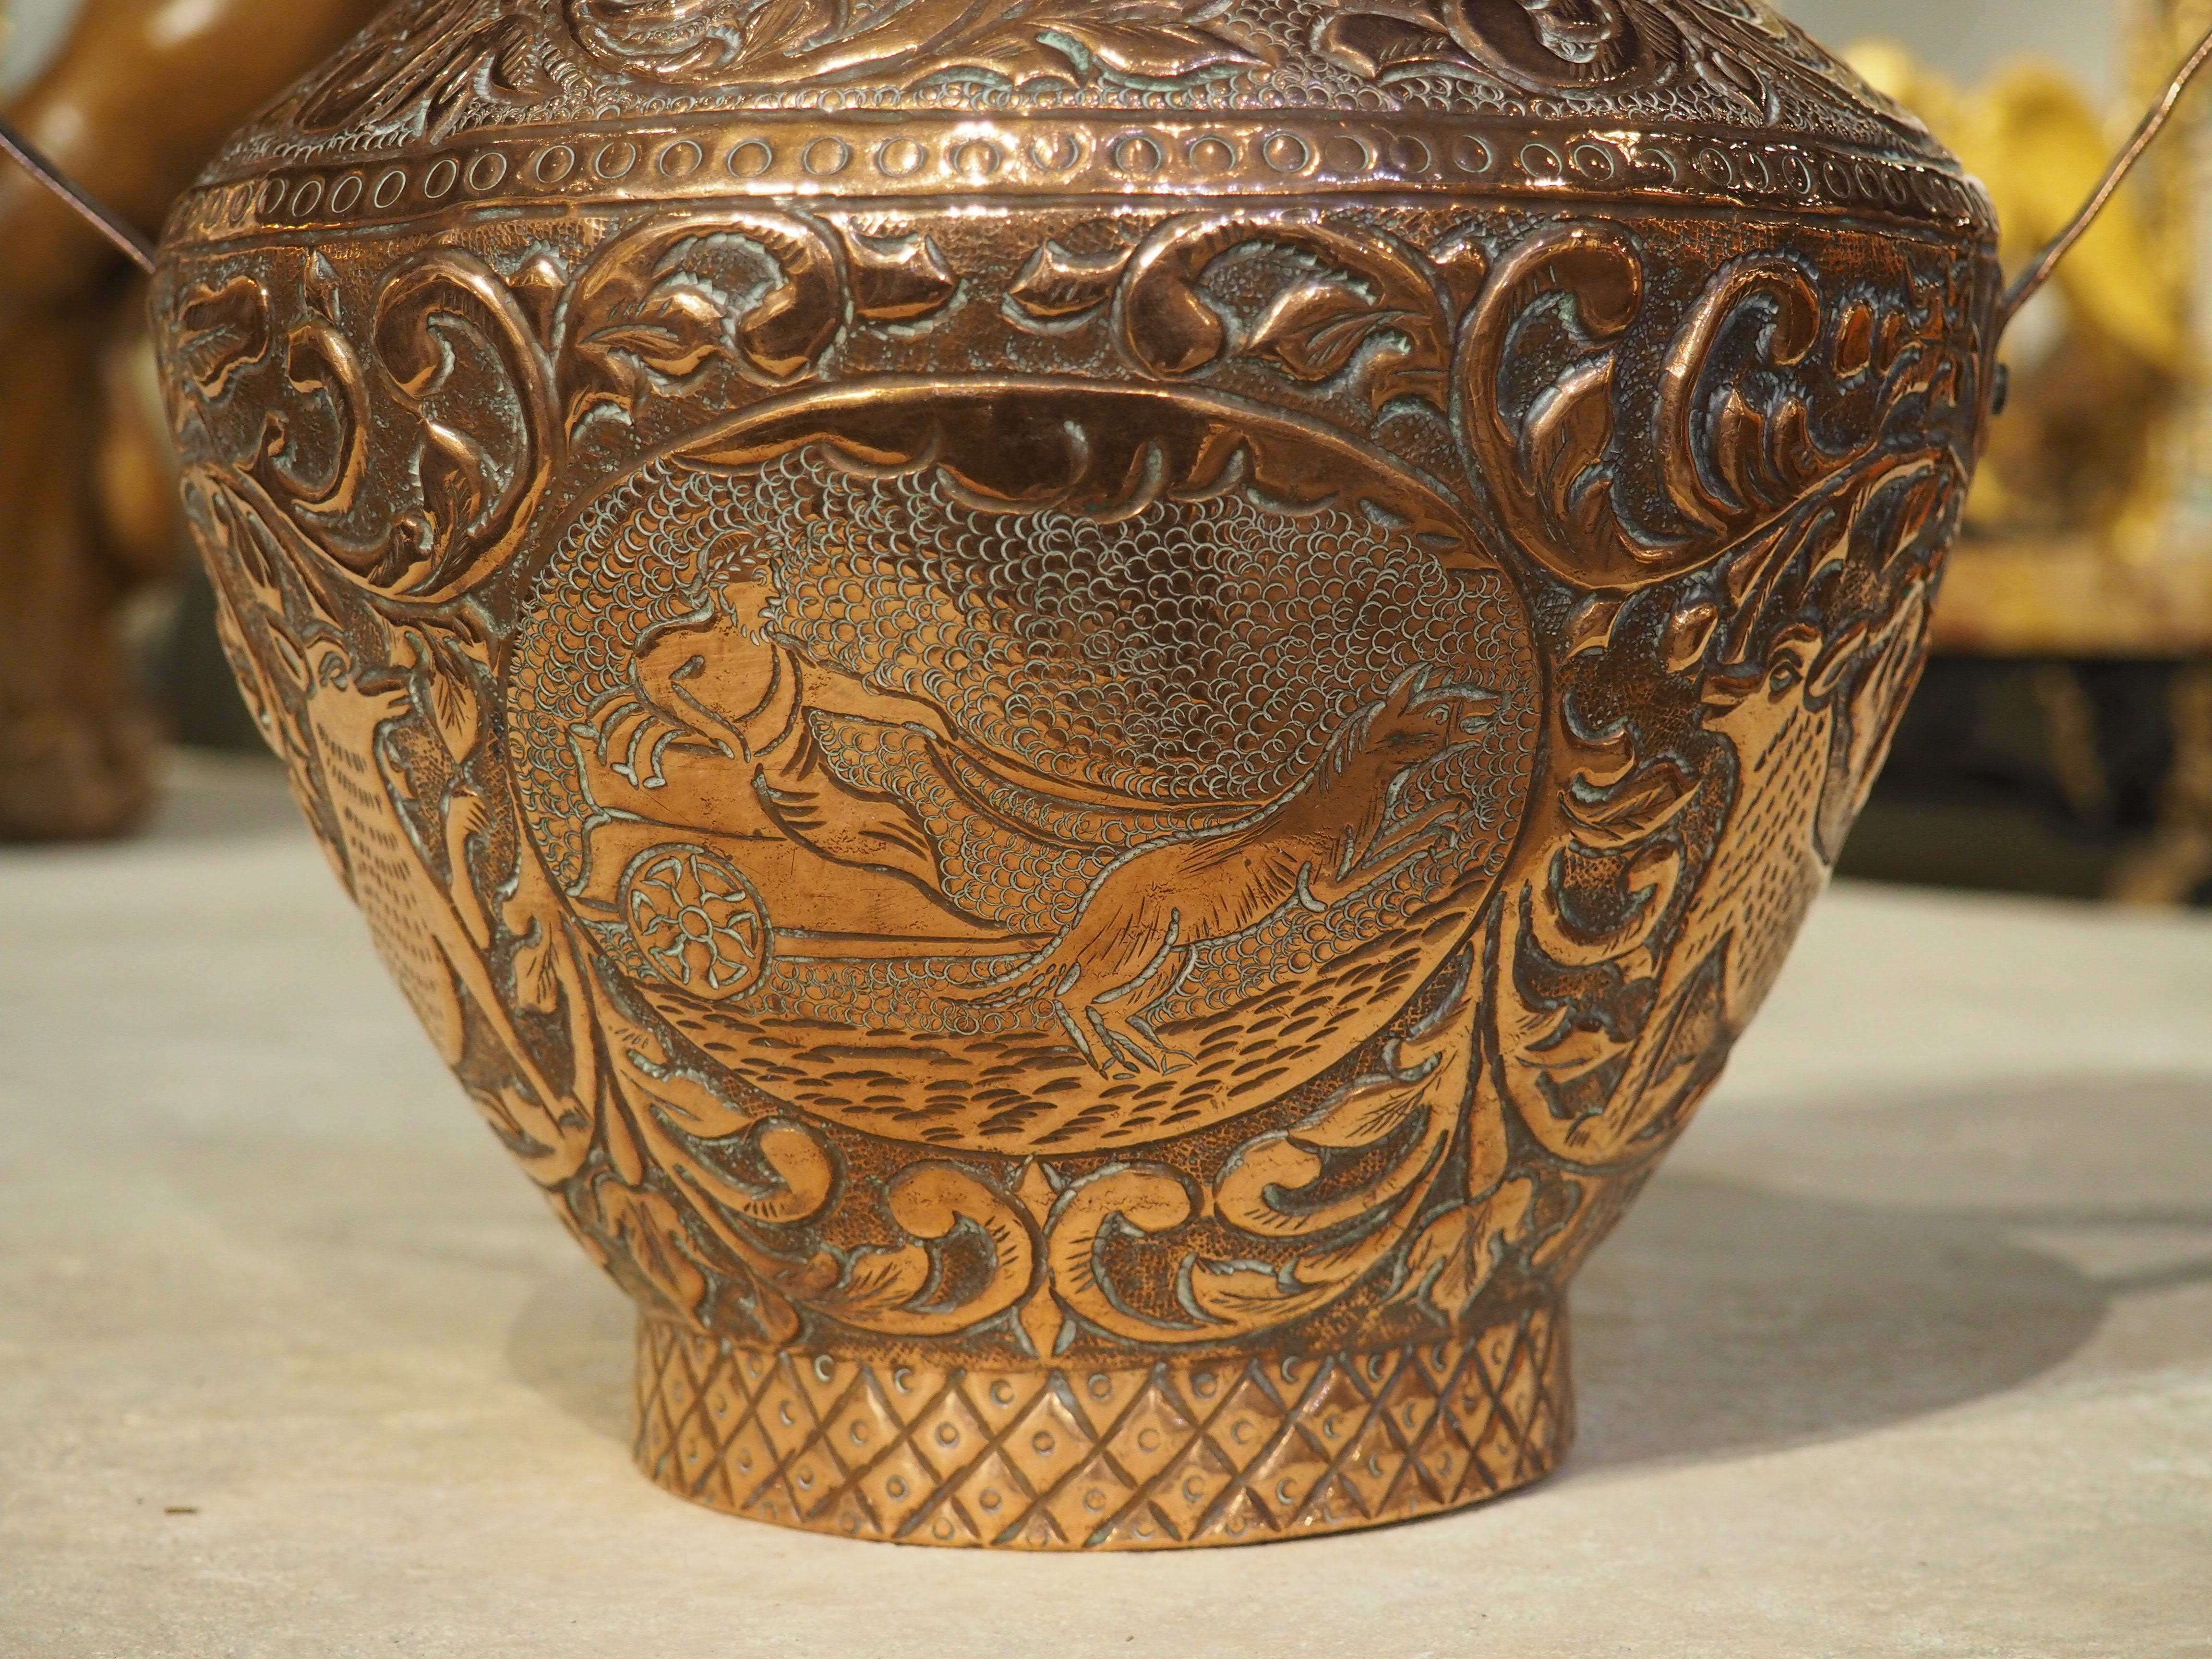 Circa 1800 French Copper 2-Handled Vase with Chariot and Cartouche In Good Condition For Sale In Dallas, TX